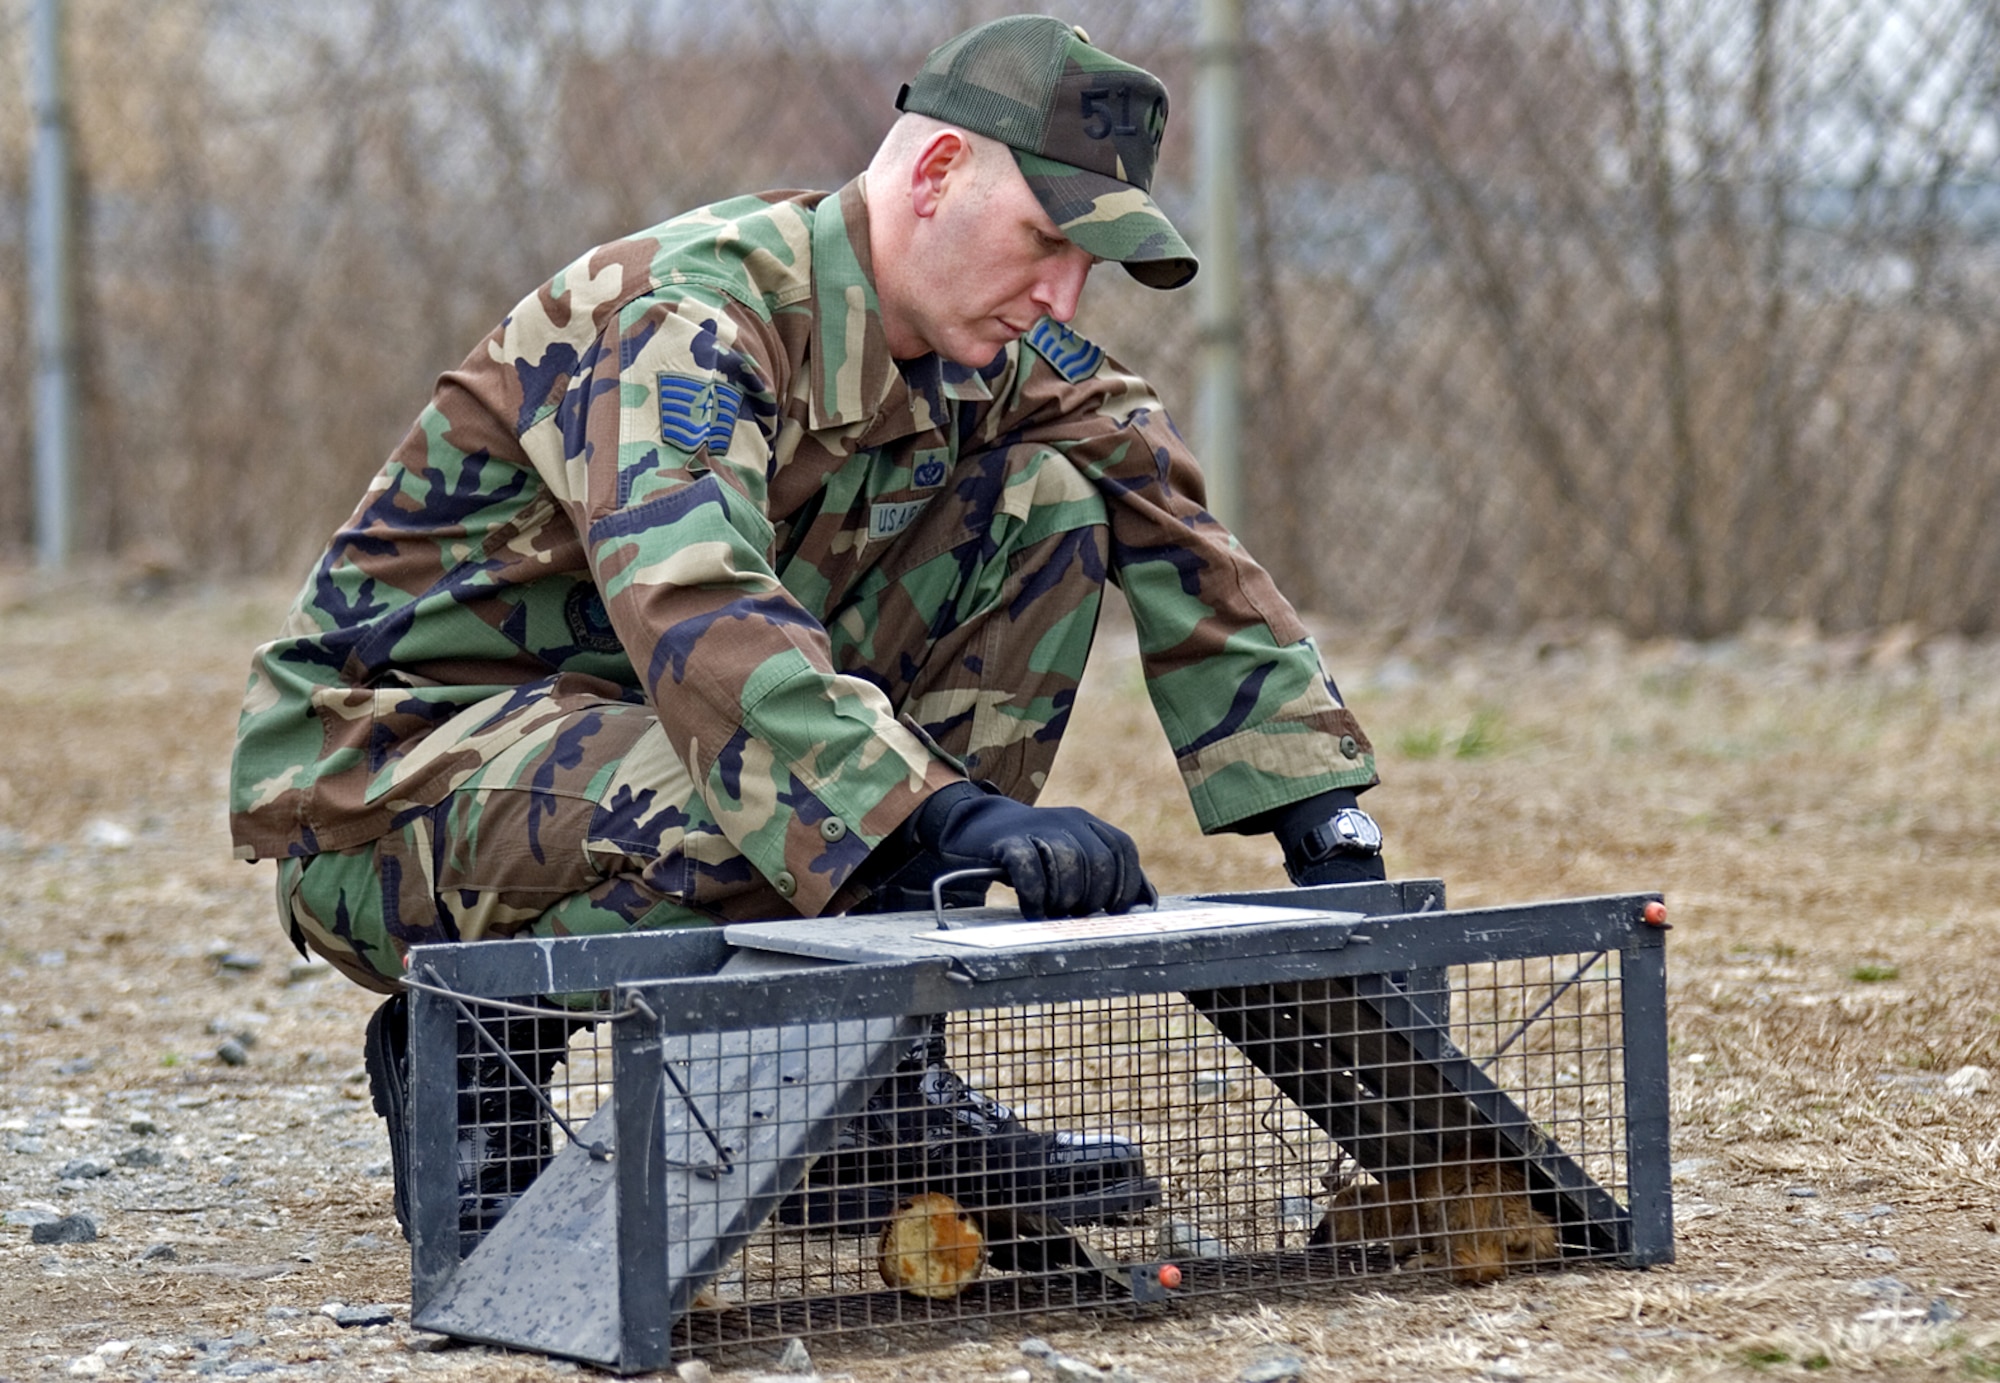 OSAN AIR BASE, Republic of Korea --  Tech. Sgt. Steven Coffman, 51st Civil Engineer Squadron pest management shop, prepares to release a wild ferret from a hav-a-hart live animal cage.  The three-member pest management shop handles all stray and feral animals found on base as well as various rodent and insect pests.  For pest management issues, contact the 51st CES service call desk at 784-6226. (Photo by Master Sgt. Ben Huseman)
